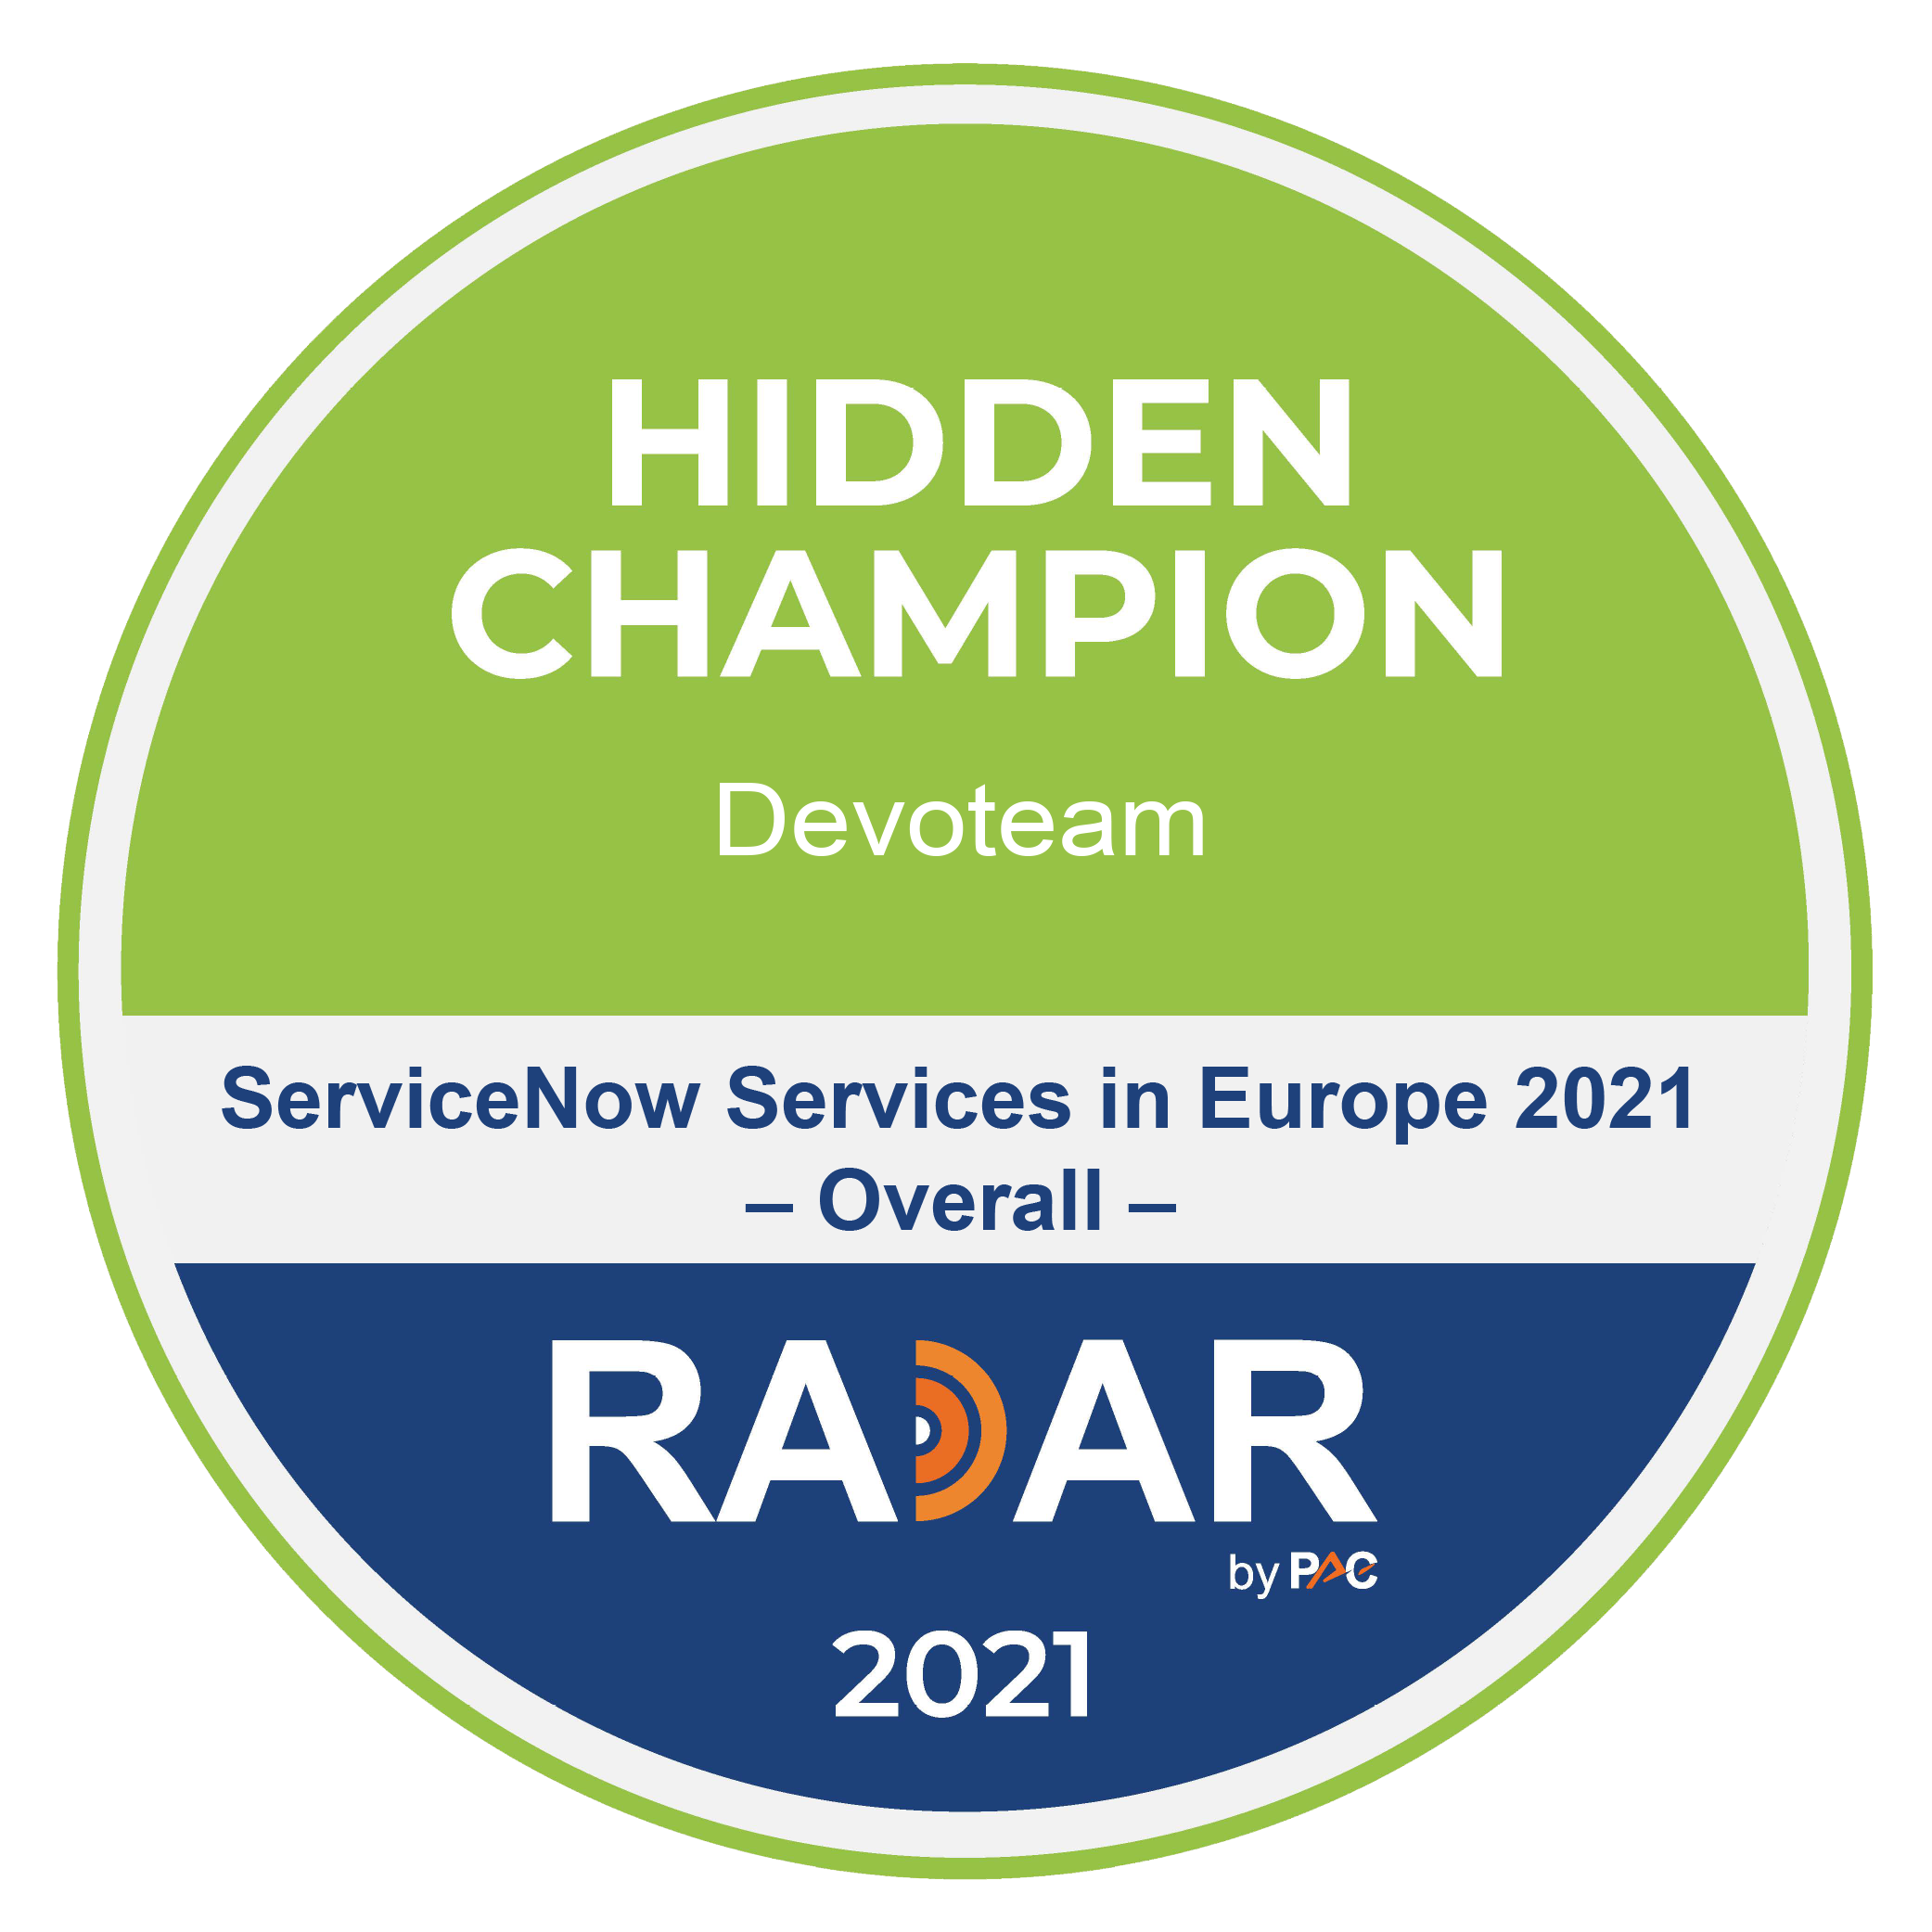 Devoteam recognized as ‘Hidden Champion’ within ServiceNow